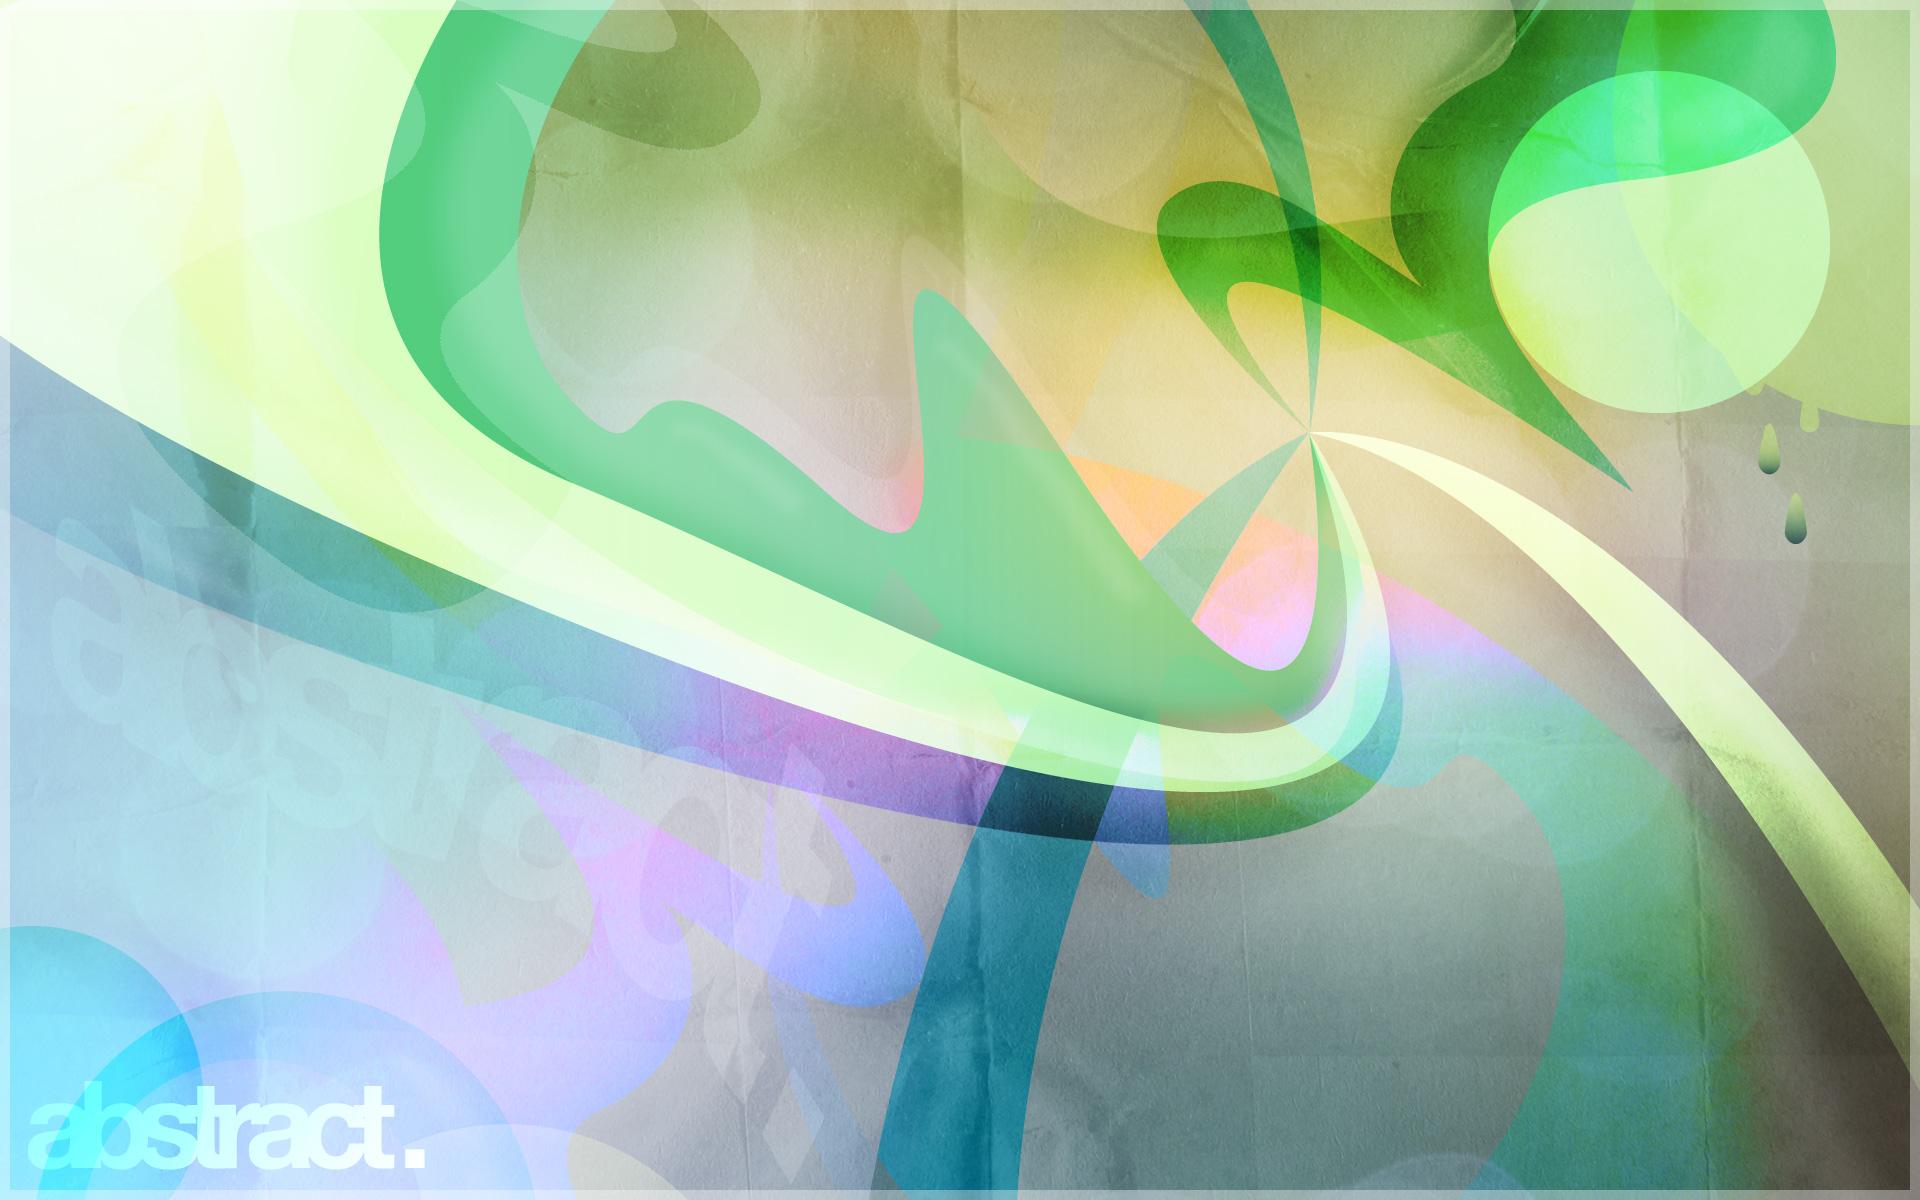 How To Design An Abstract Wallpaper In Photohop and Illustrator